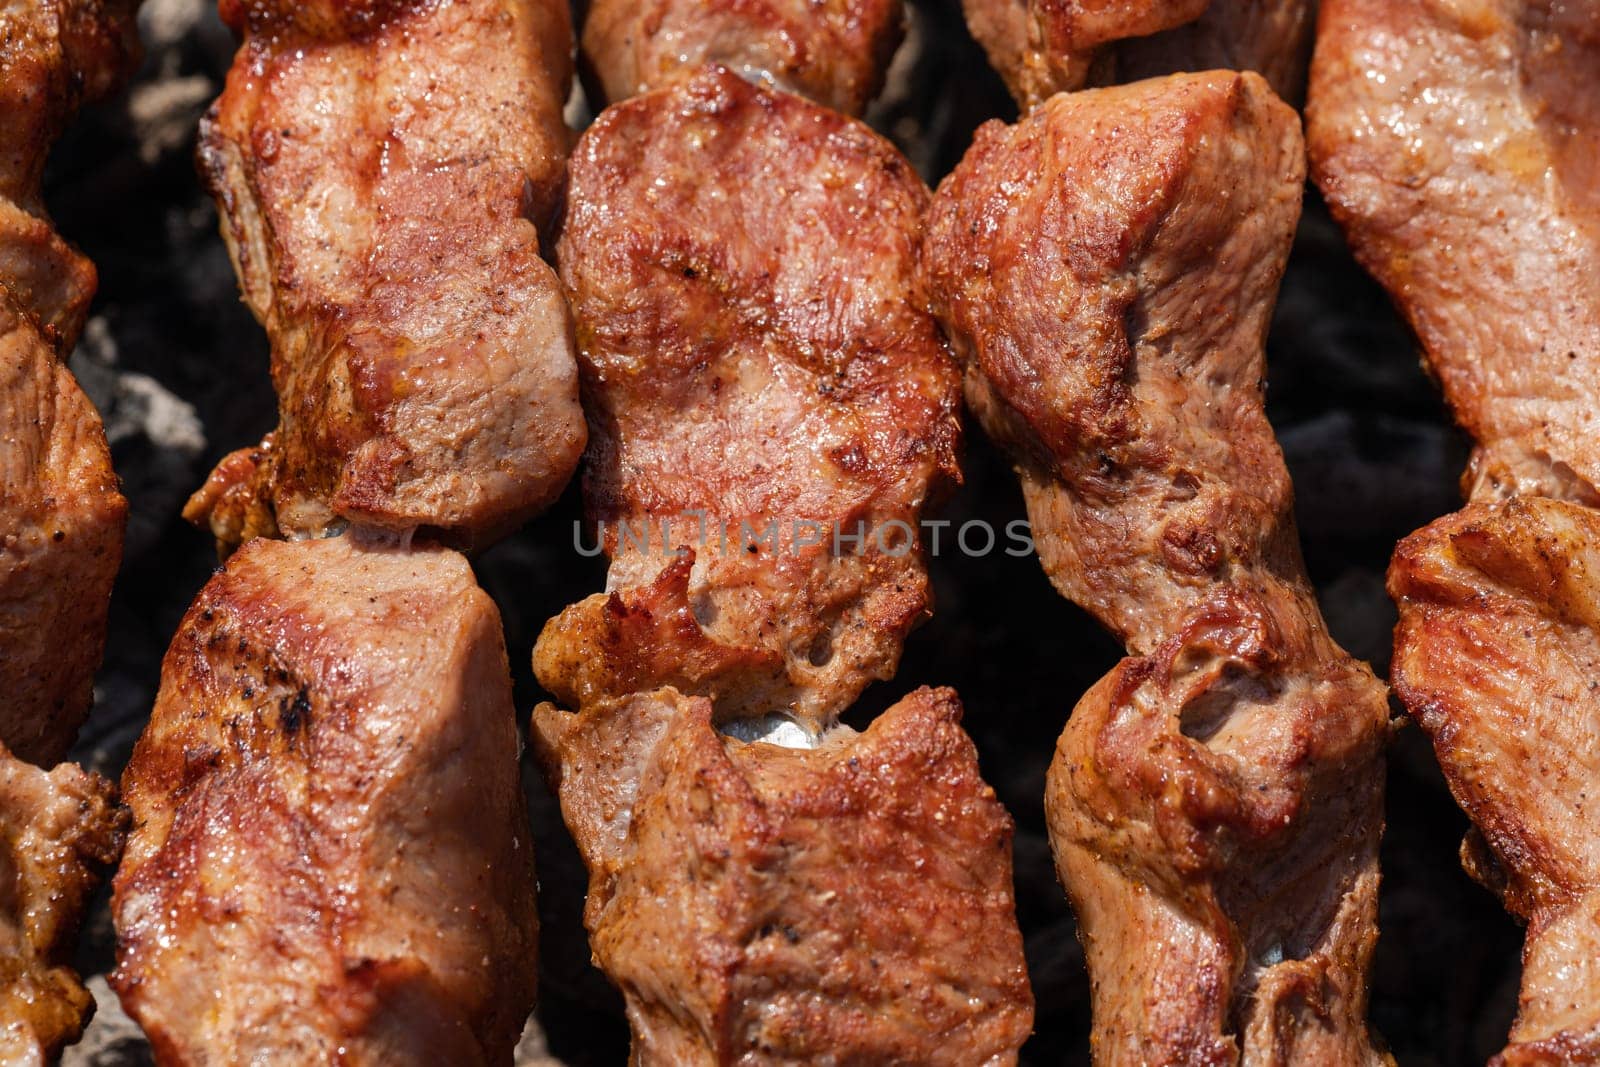 Appetizing juicy pork shish kebabs cooking on metal skewers on charcoal grill with fragrant smoke. Close-up view, selective focus on tasty pieces of roast meat. Cooking during summer picnic.